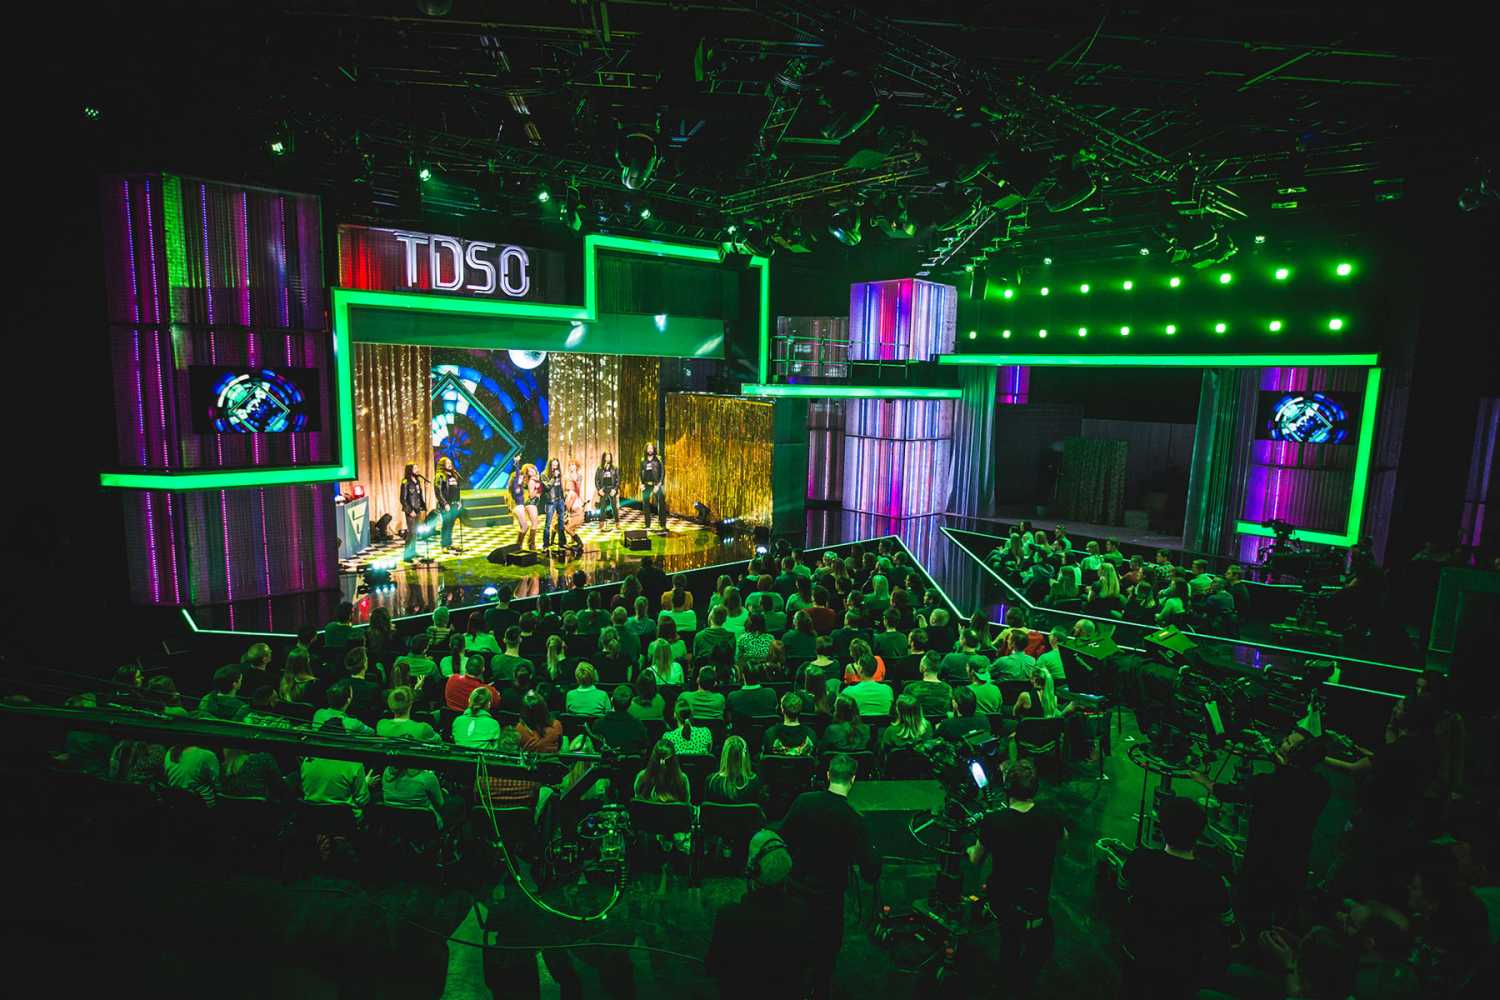 TDSO is a highly popular, TV series on Flemish commercial channel VTM